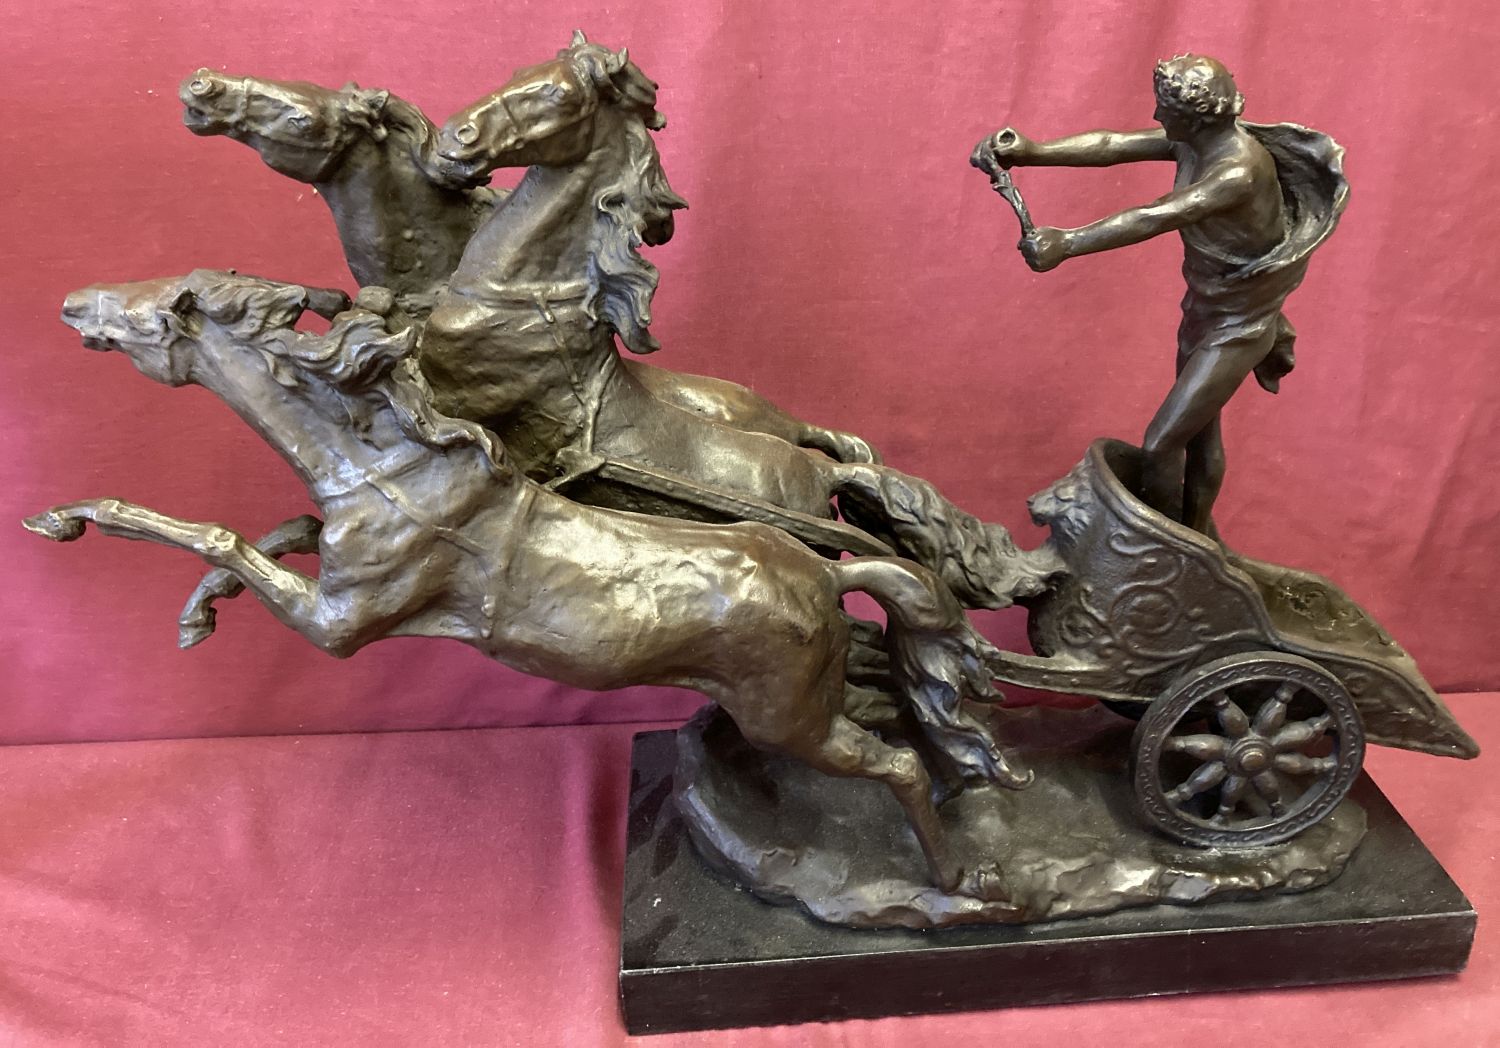 A large marble based bronze figurine of a Chariot racer and 3 rearing horses.